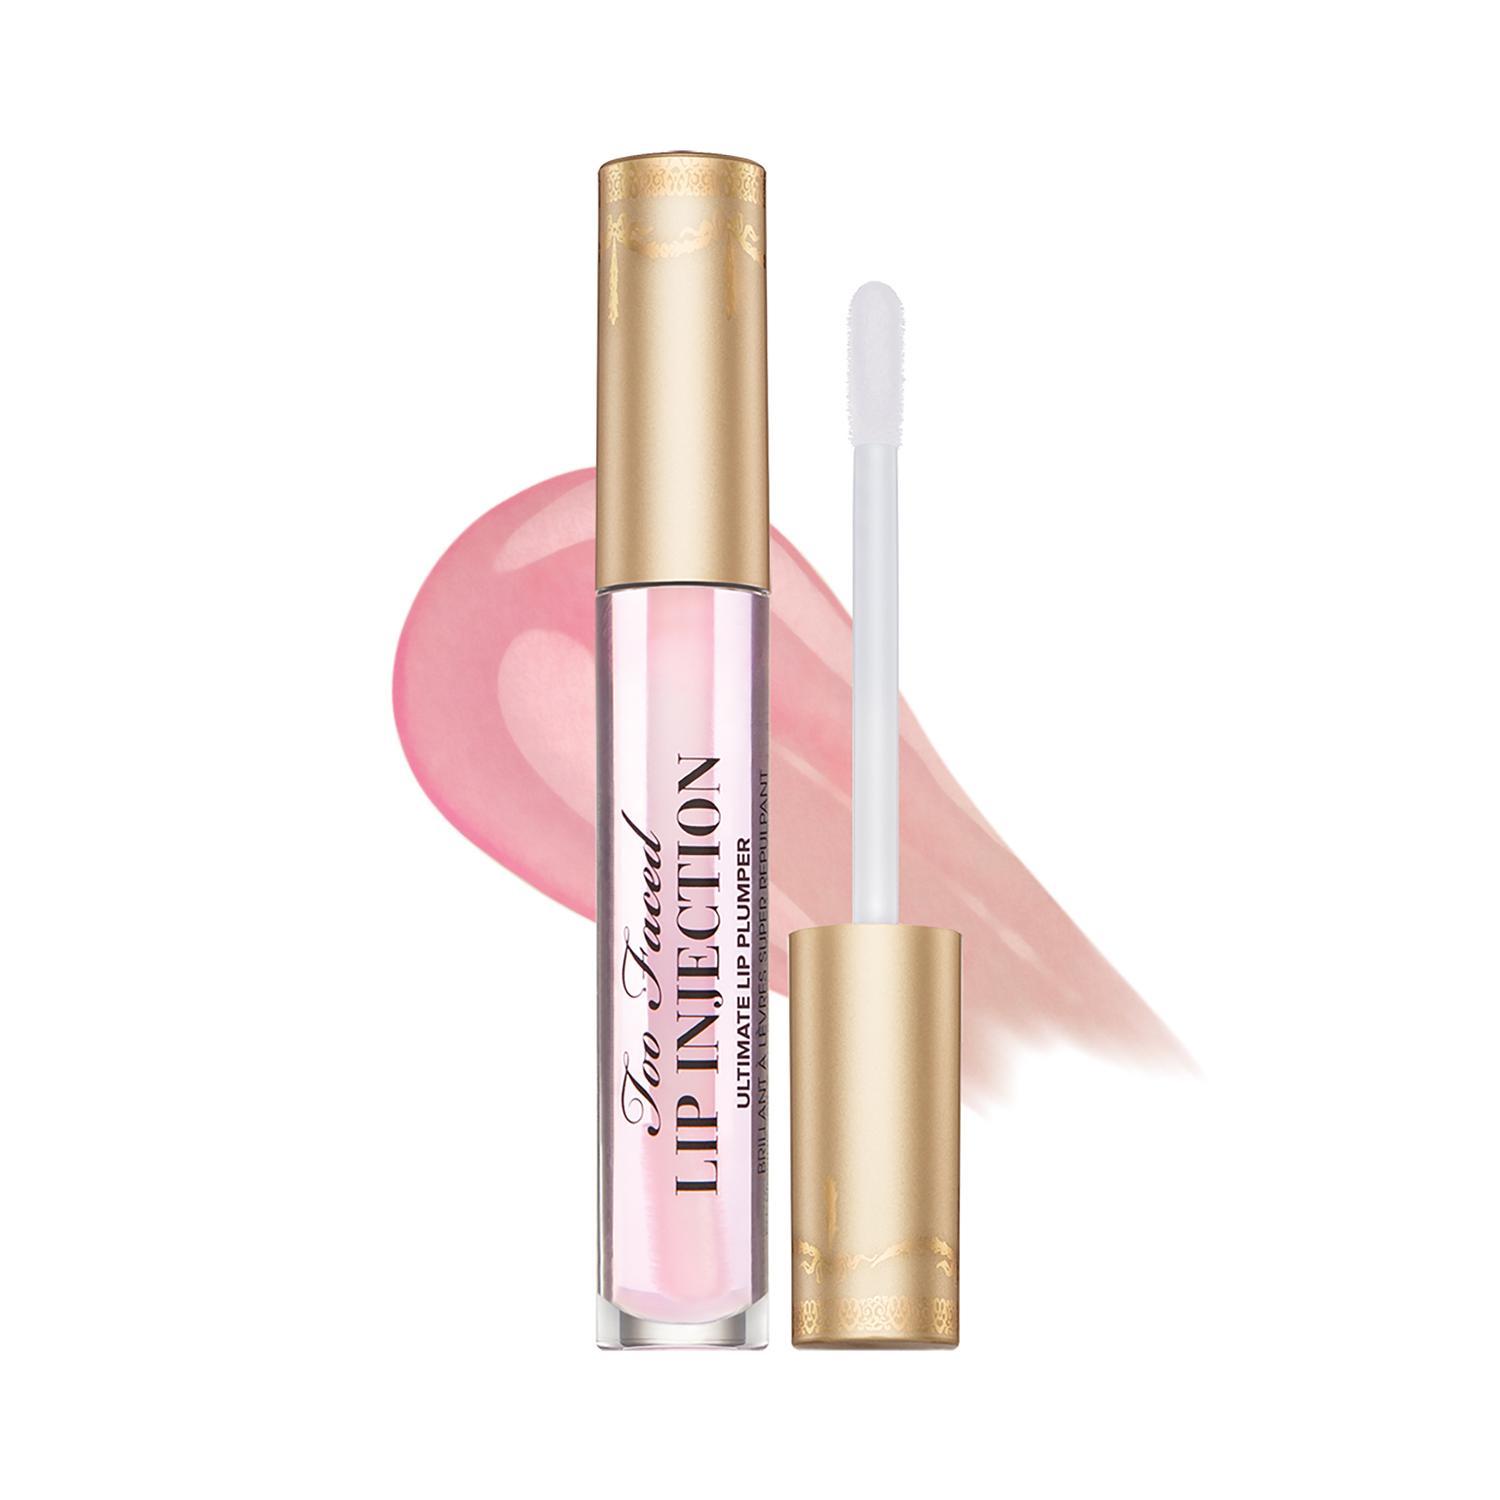 too faced lip injection extreme lip plumper - clear (4g)